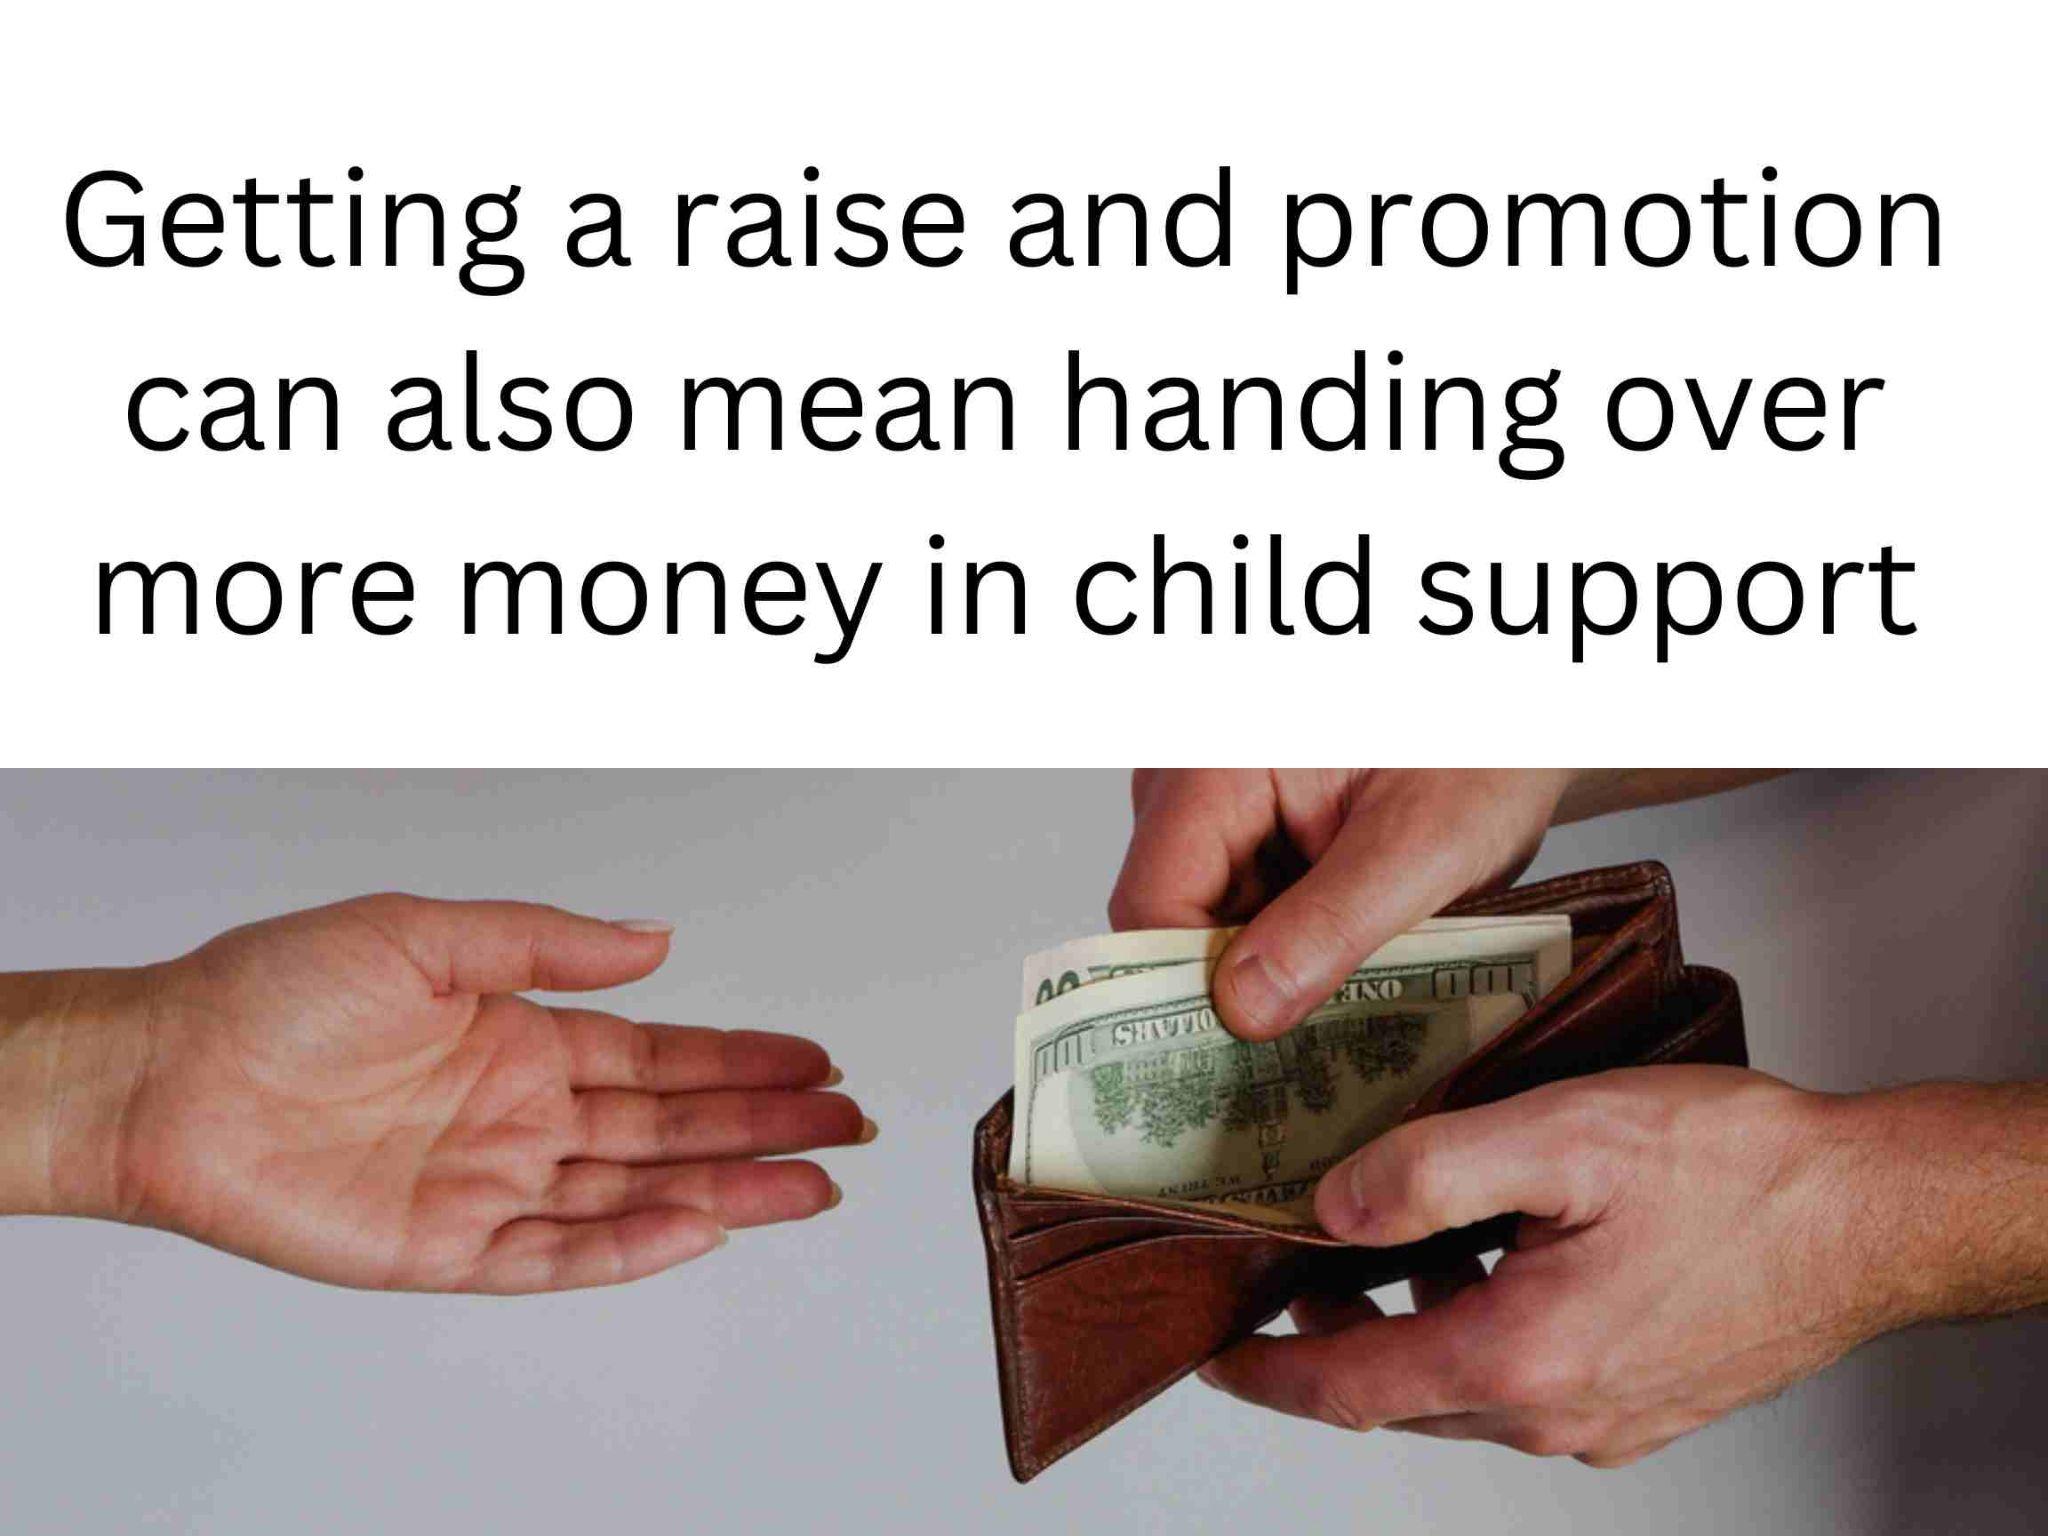 Person handing over cash from a wallet, with a text overlay about the impact of a raise on child support payments